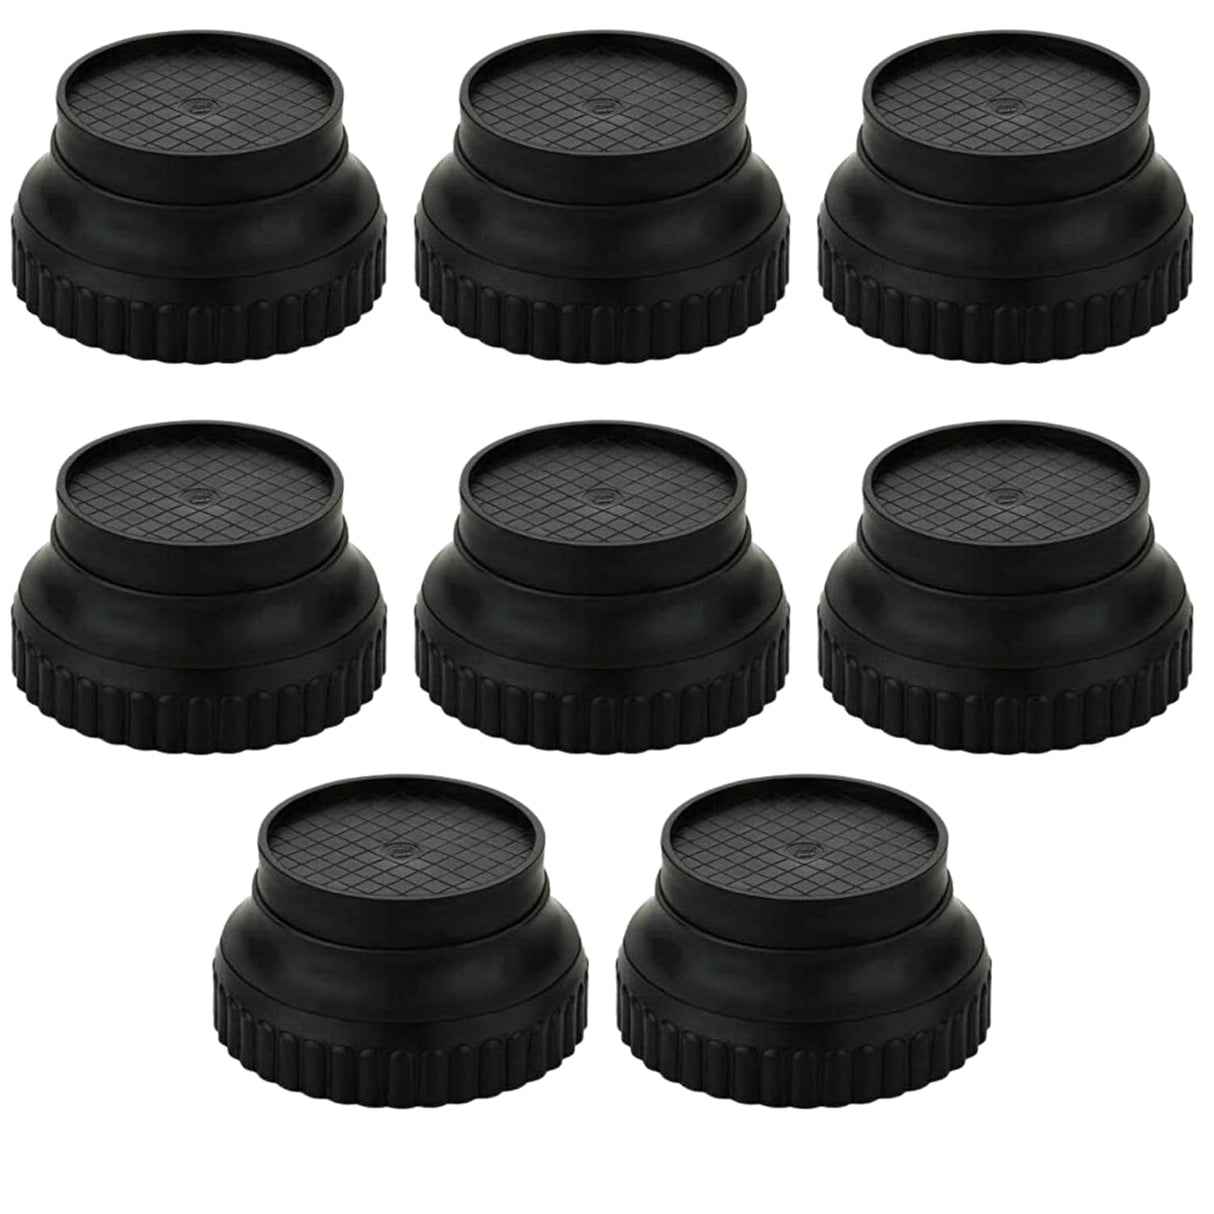 Plastic Round Base Stand 8 Pcs for Bed, Refrigerator Stand, Washing Machine Stand, Furniture Base Stand and Fridge Stand for Single Door and Double Door (Black Round)